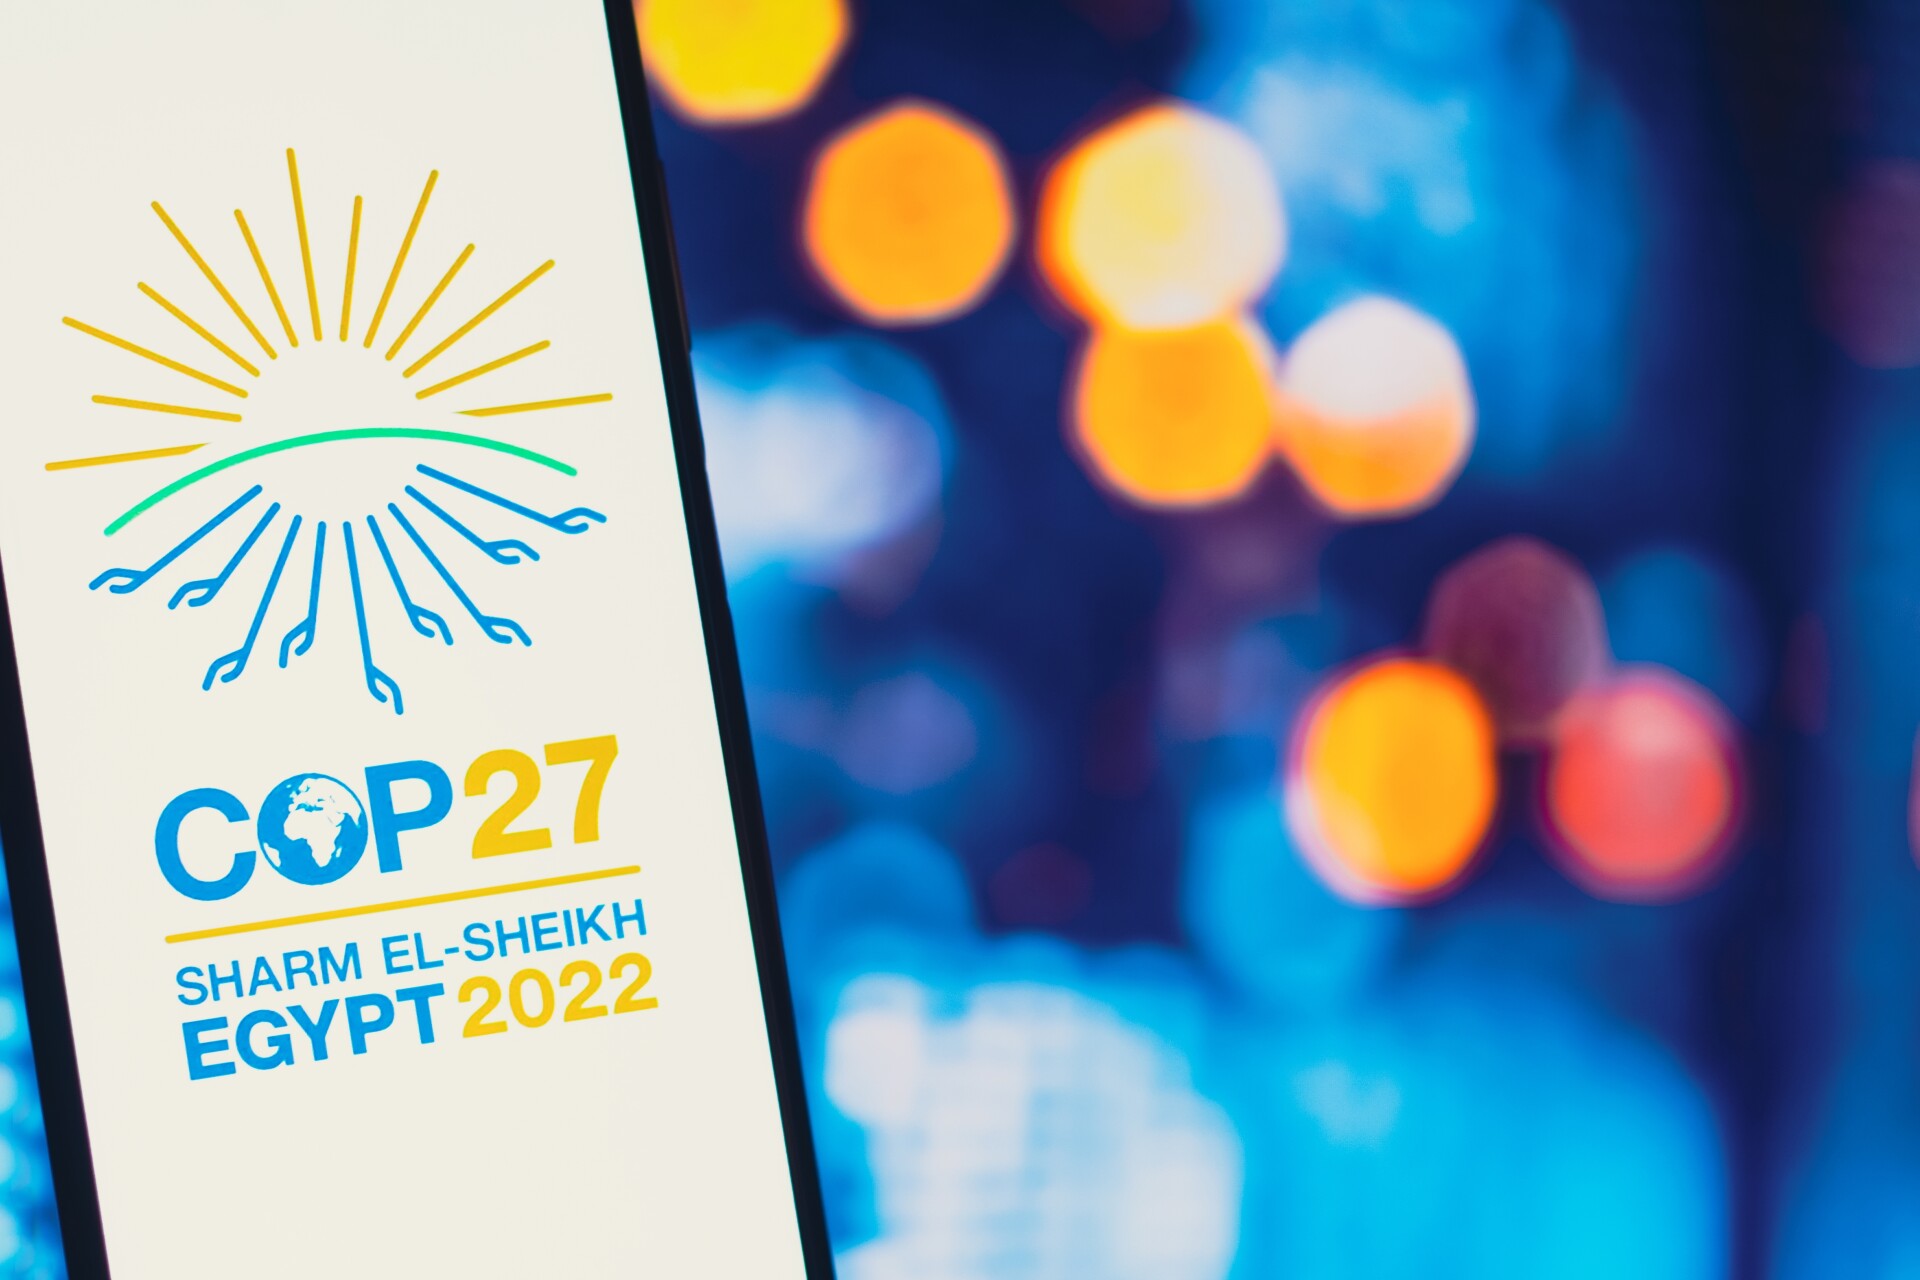 The United Nations Climate Change Conference 2022 (COP27) will be held in November in Egypt.